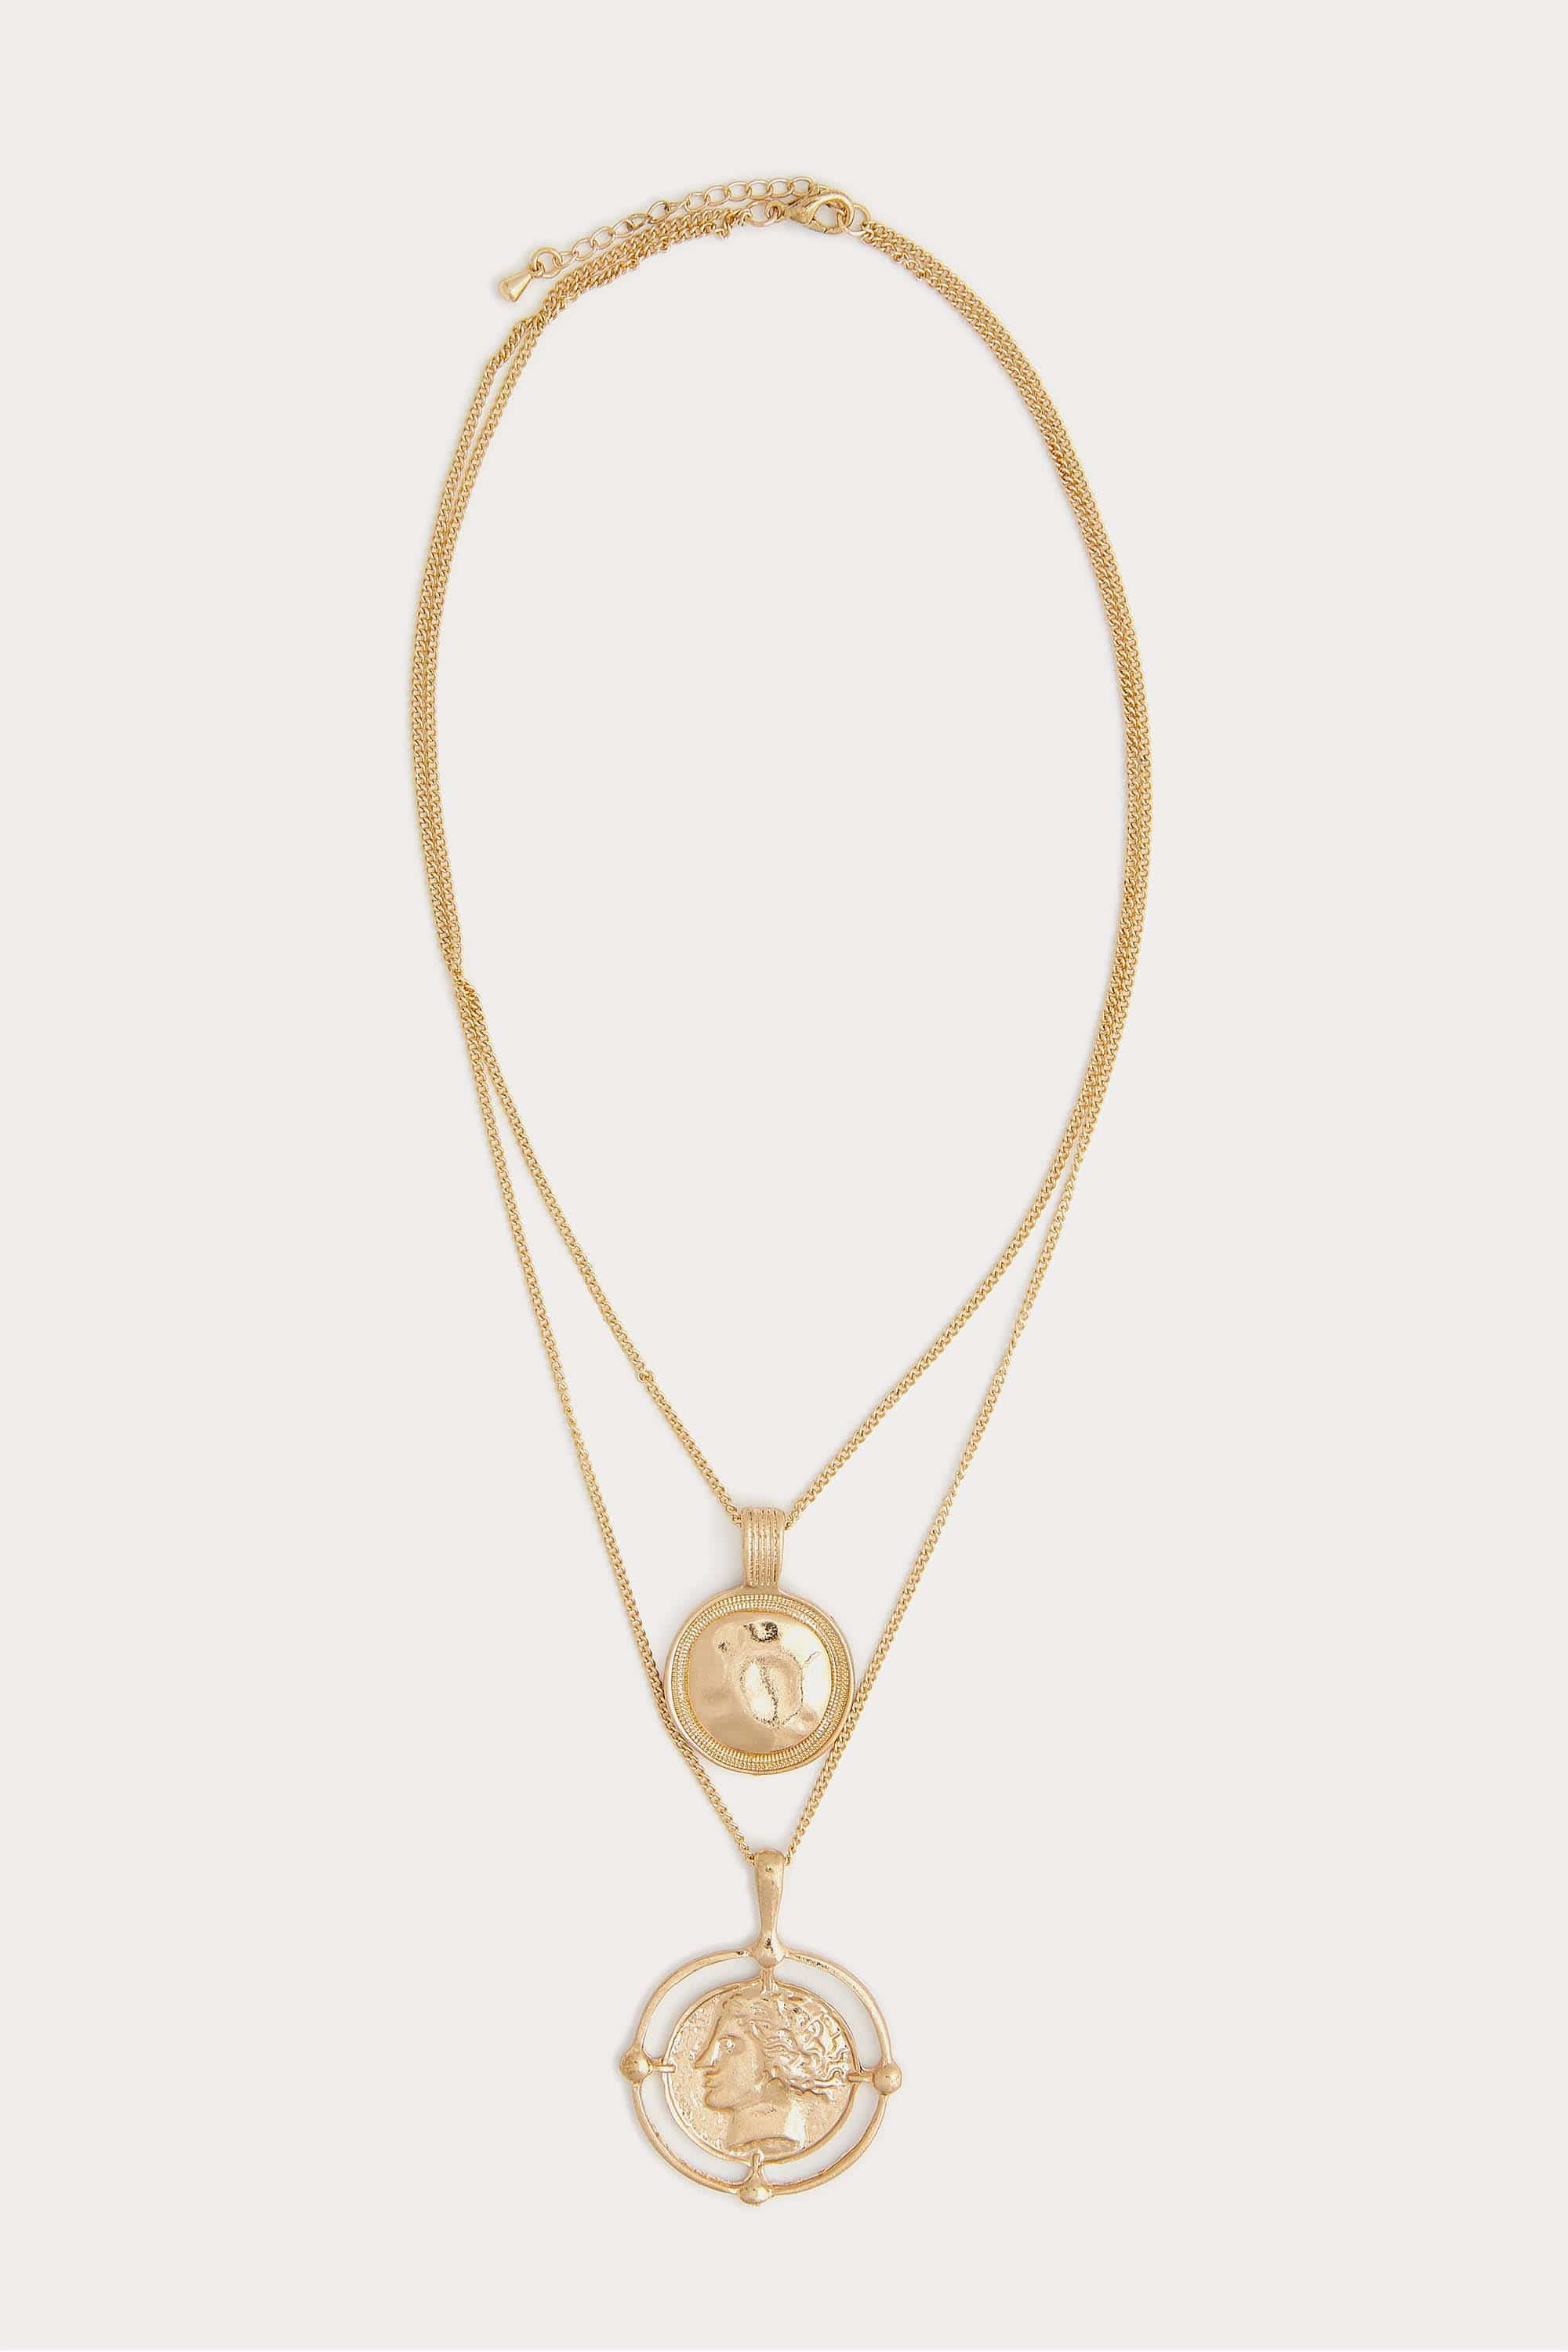 POINT BREAK NECKLACE - GOLD NECKLACE PETIT MOMENTS GOLD One Size 